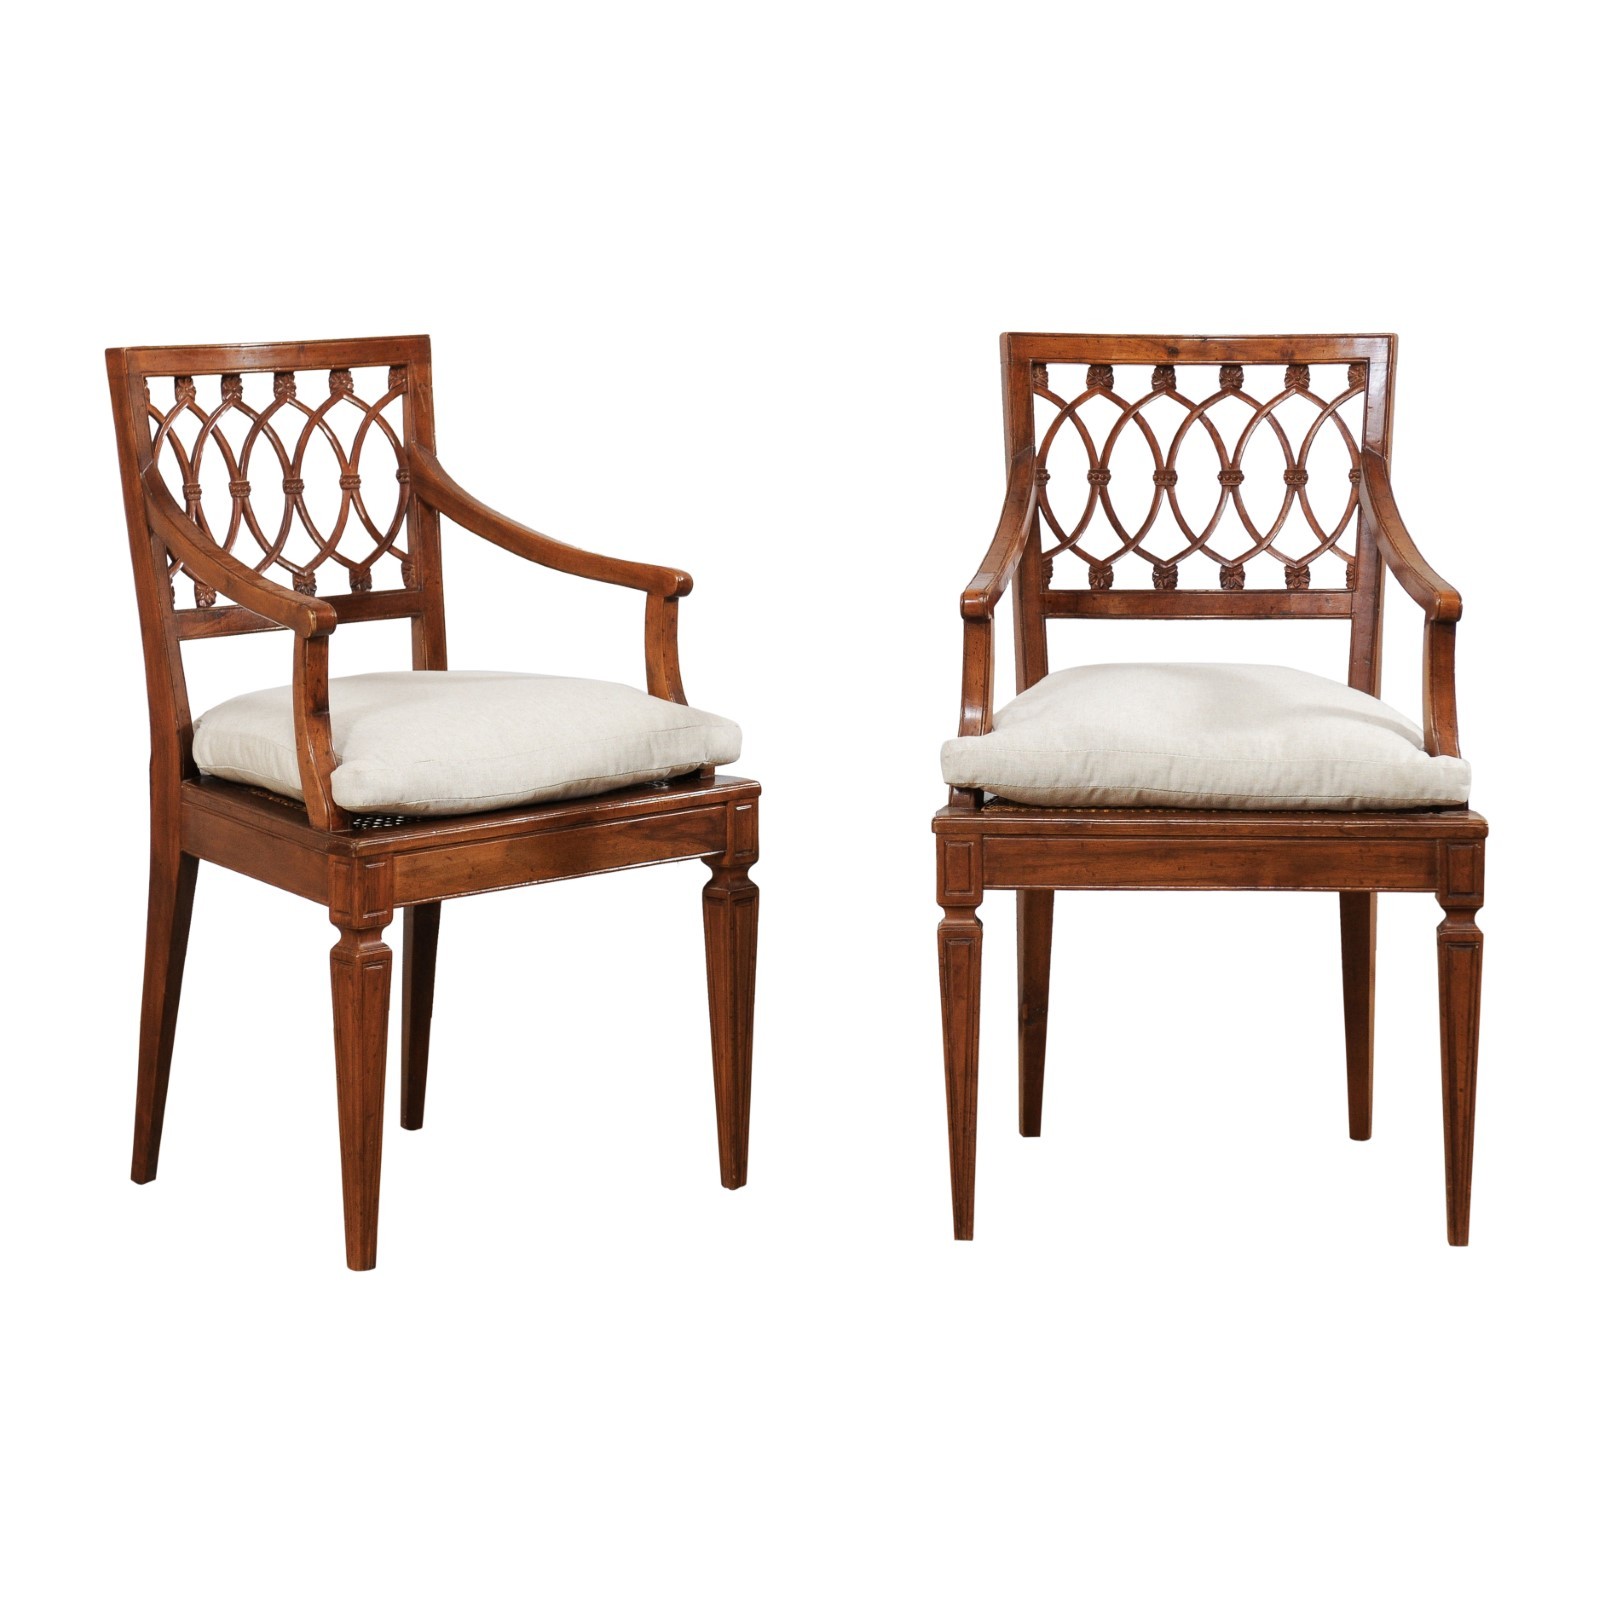 A Lovely Pair of Italian Wooden Arm Chairs 